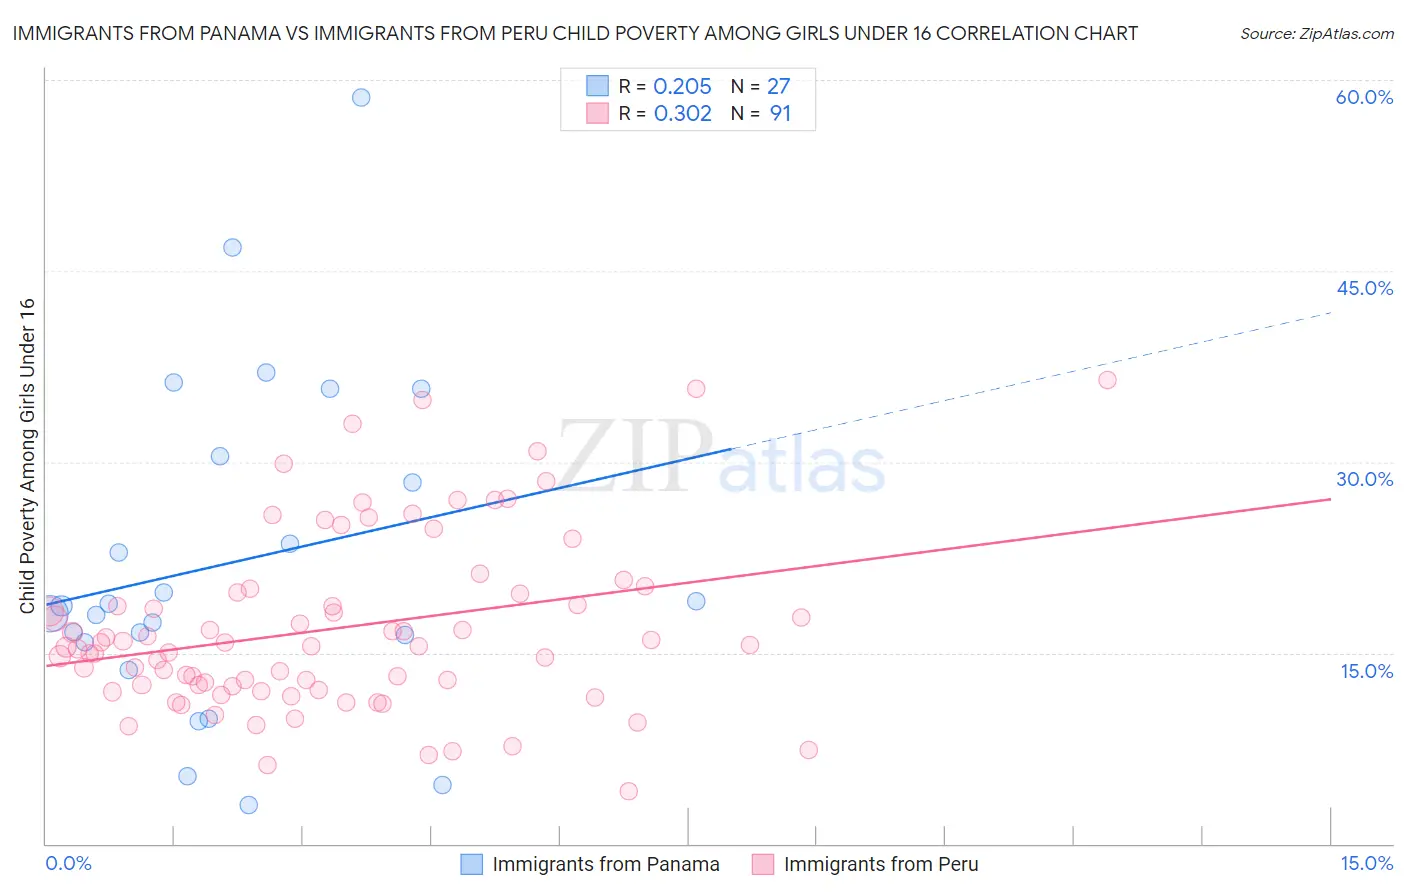 Immigrants from Panama vs Immigrants from Peru Child Poverty Among Girls Under 16